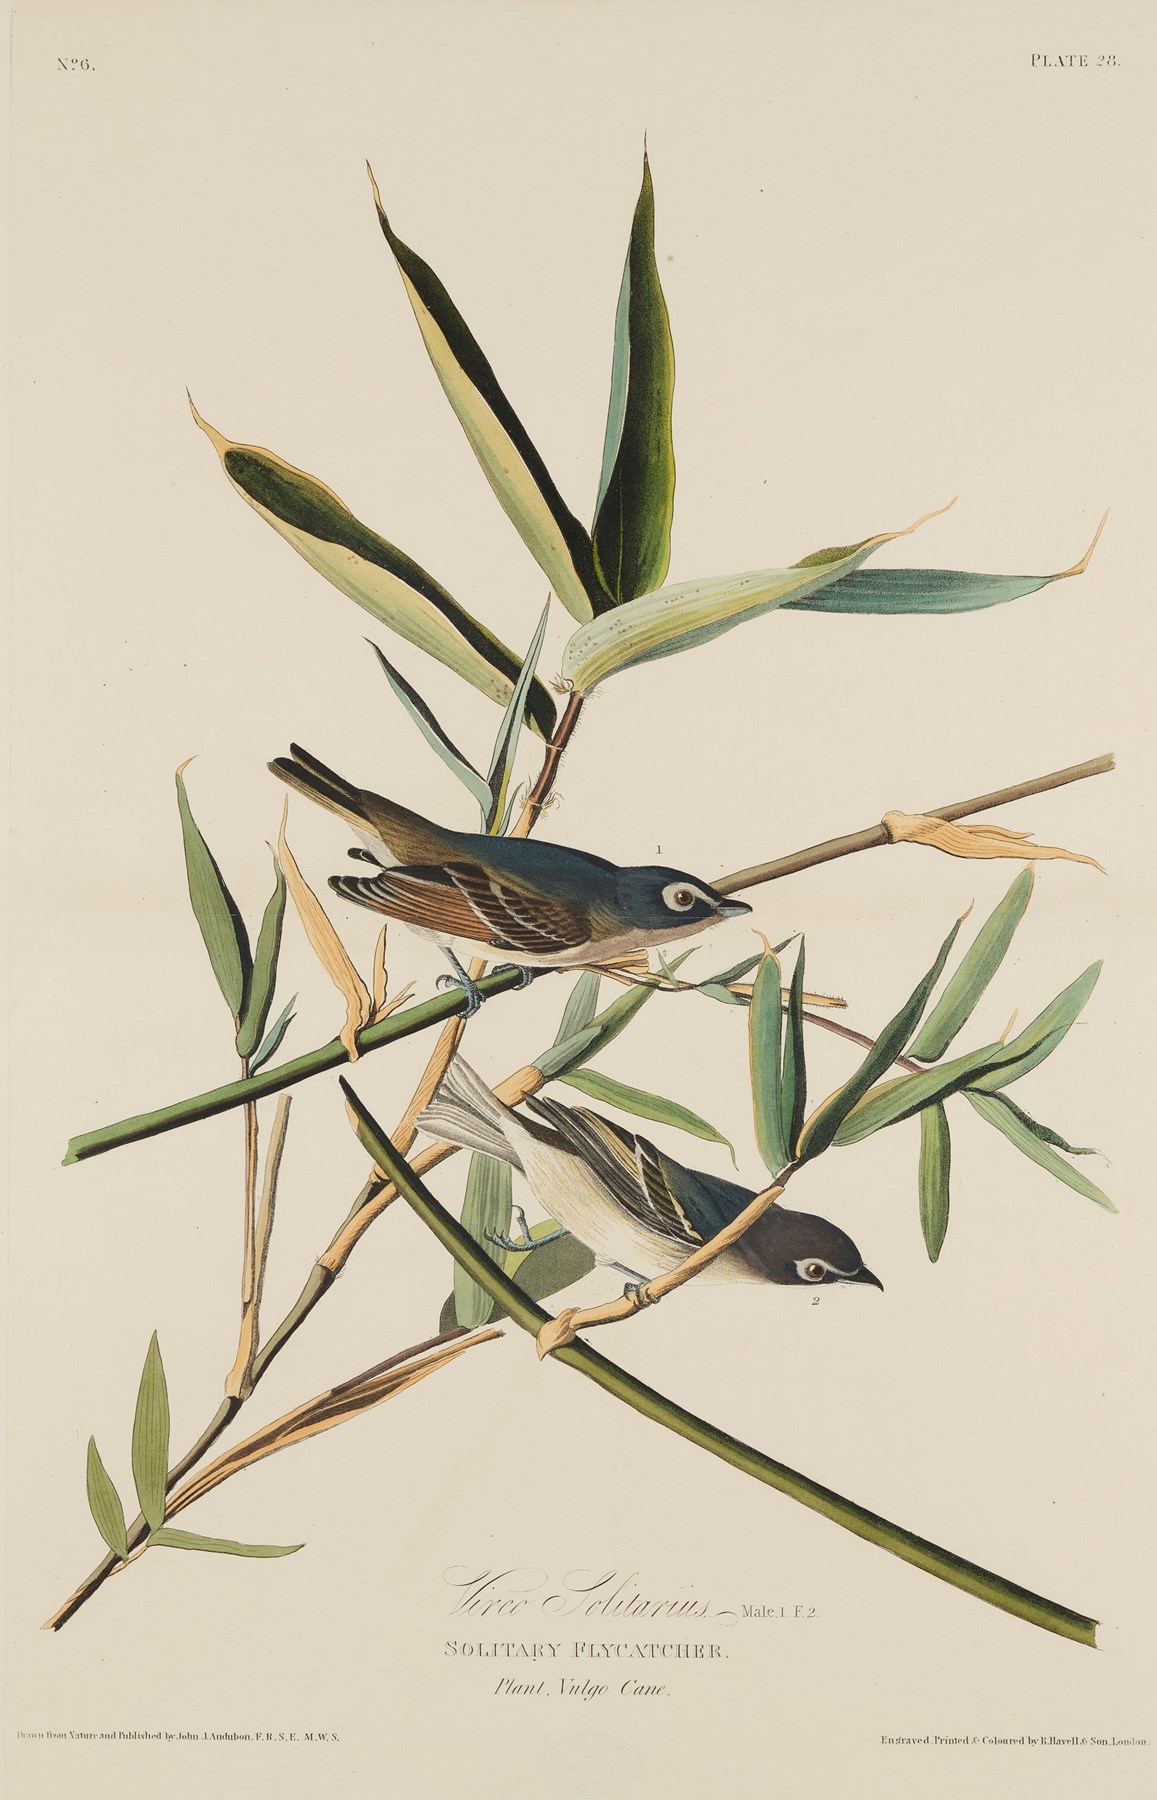 Print depicting Solitary Flycatchers from Birds of America, by John James Audubon. Image © National Museums Scotland